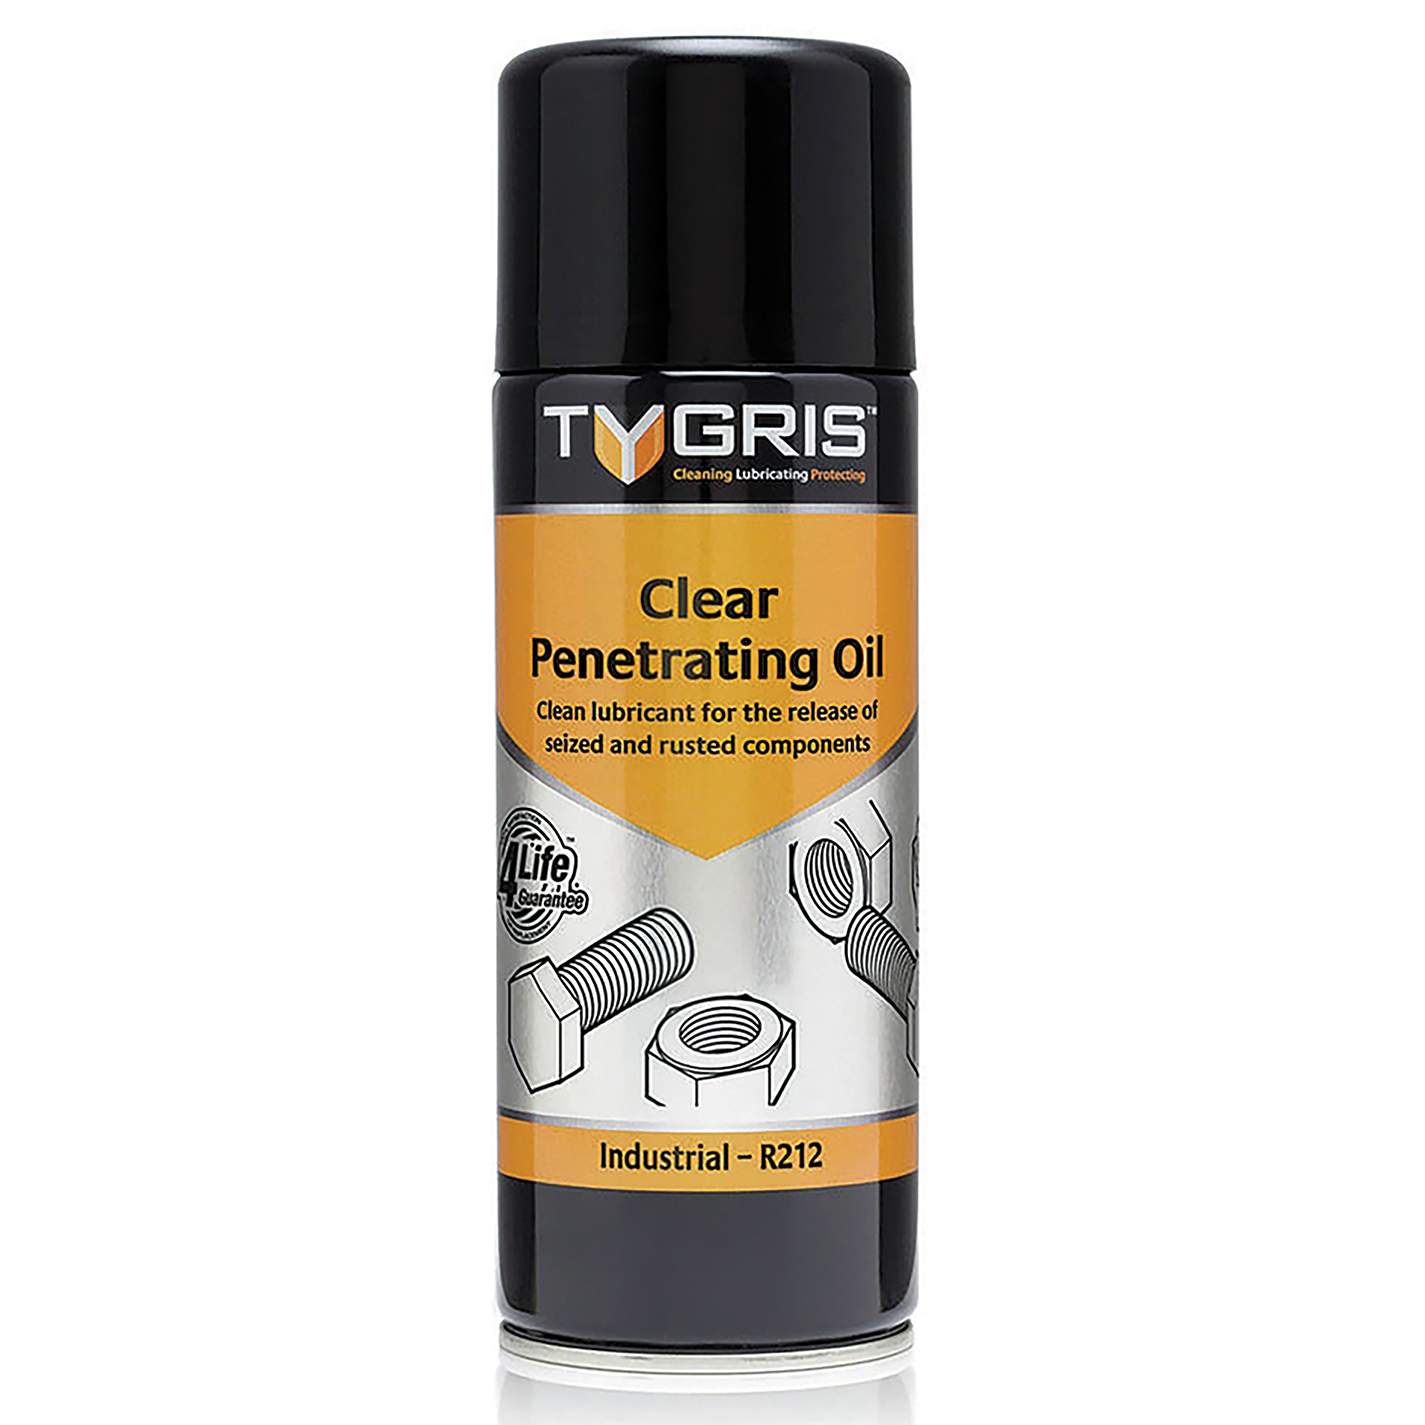 CLEAR PENETRATING OIL